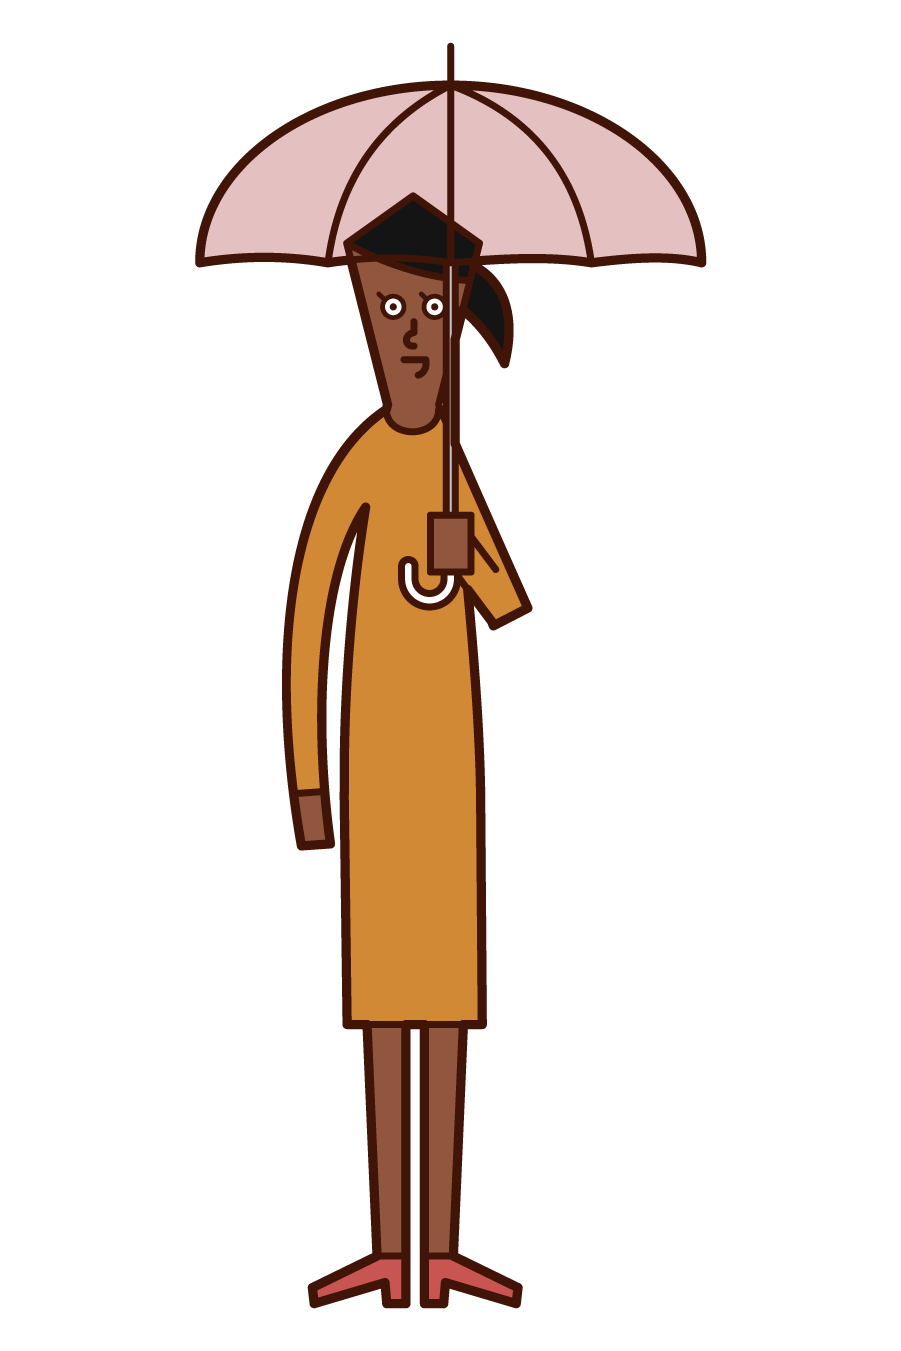 Illustration of a woman holding an umbrella